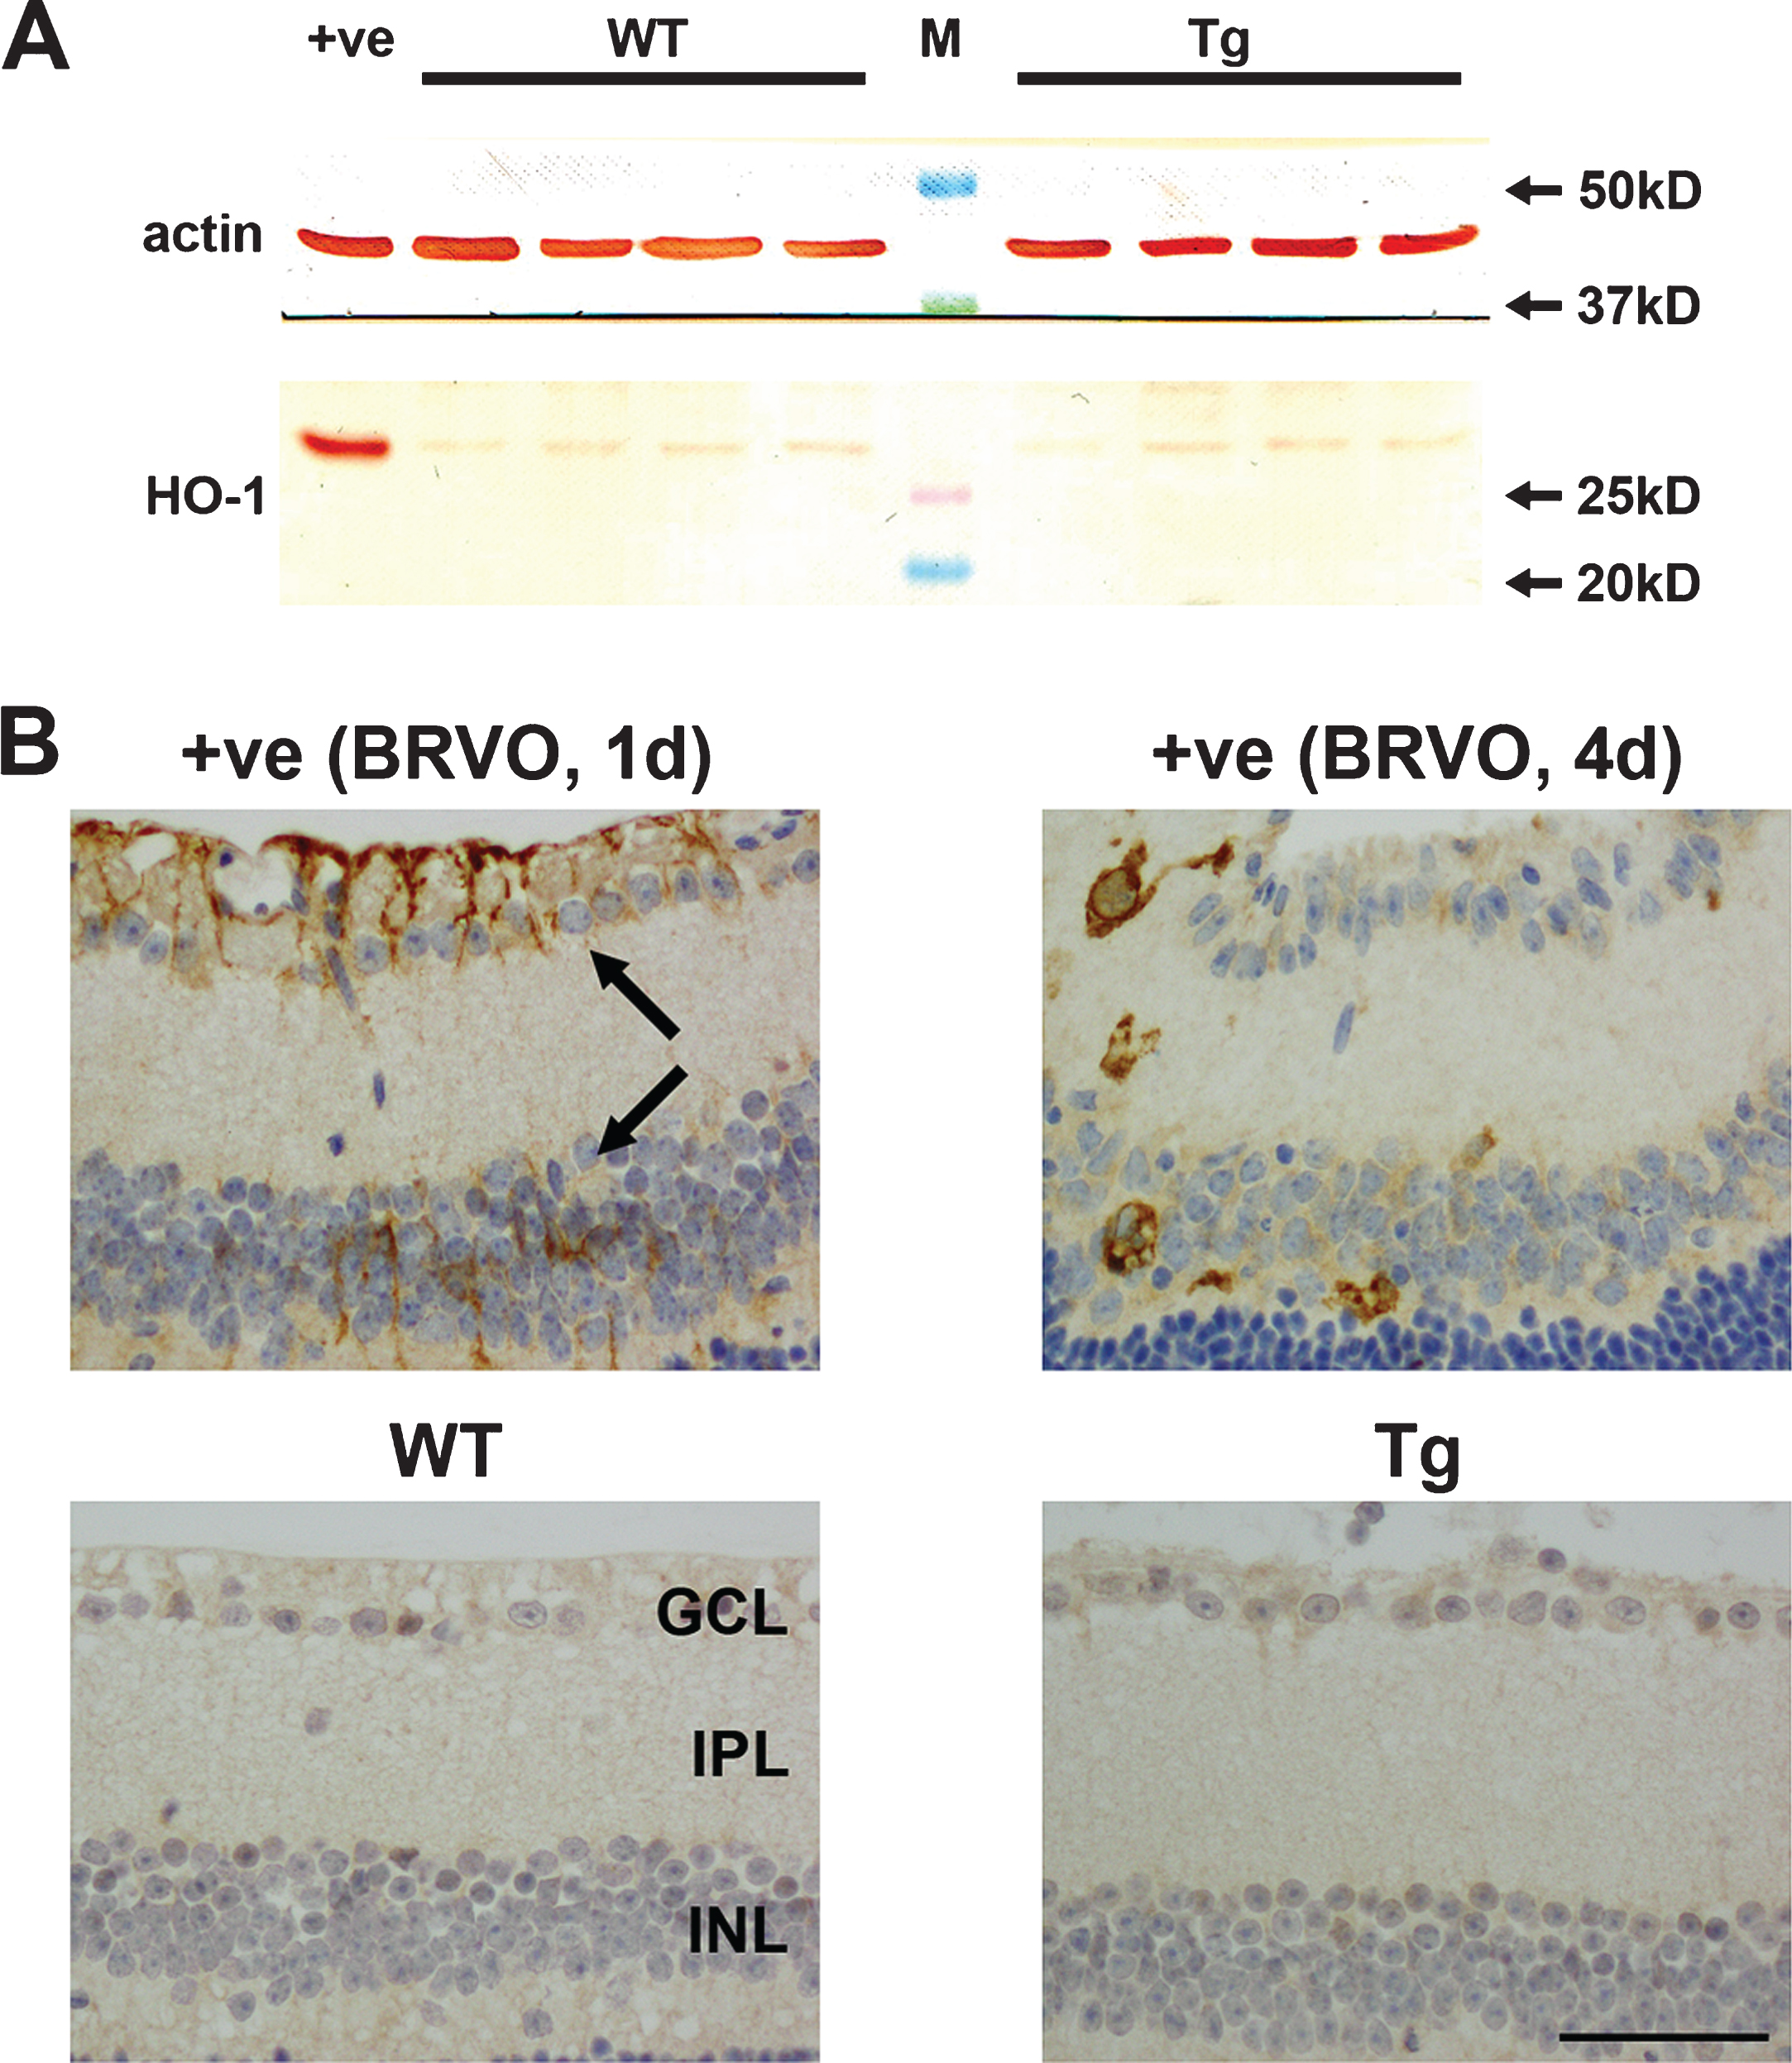 Analysis of heme oxygenase-1 (HO-1) expression in WT and Tg retinas. A) Expression of HO-1 protein in 12-month-old WT and Tg retinas as evaluated by western immunoblotting. An intense, single band of the expected molecular weight (32 kD) is apparent in an extract from a retinal culture treated with the pro-oxidant hydrogen peroxide (+ve). In WT and Tg retinas, a faint band of the correct molecular weight is evident. B) Representative images of HO-1 labeling in a retina subjected to branch retinal vein occlusion (BRVO, +ve control), and in 12-month-old WT and Tg retinas. HO-1 immunoreactivity is associated with astrocytes and Müller cells (arrows) in the retina analyzed 1d after induction of BRVO, and in activated microglia in the retina analyzed four days after induction of BRVO. Note: the area of retina shown is immediately adjacent to the vein occlusion site and not directly affected. No HO-1-positive cells are evident in WT or Tg retinas. Scale bar: 50 μm. GCL, ganglion cell layer; IPL, inner plexiform layer; INL, inner nuclear layer.